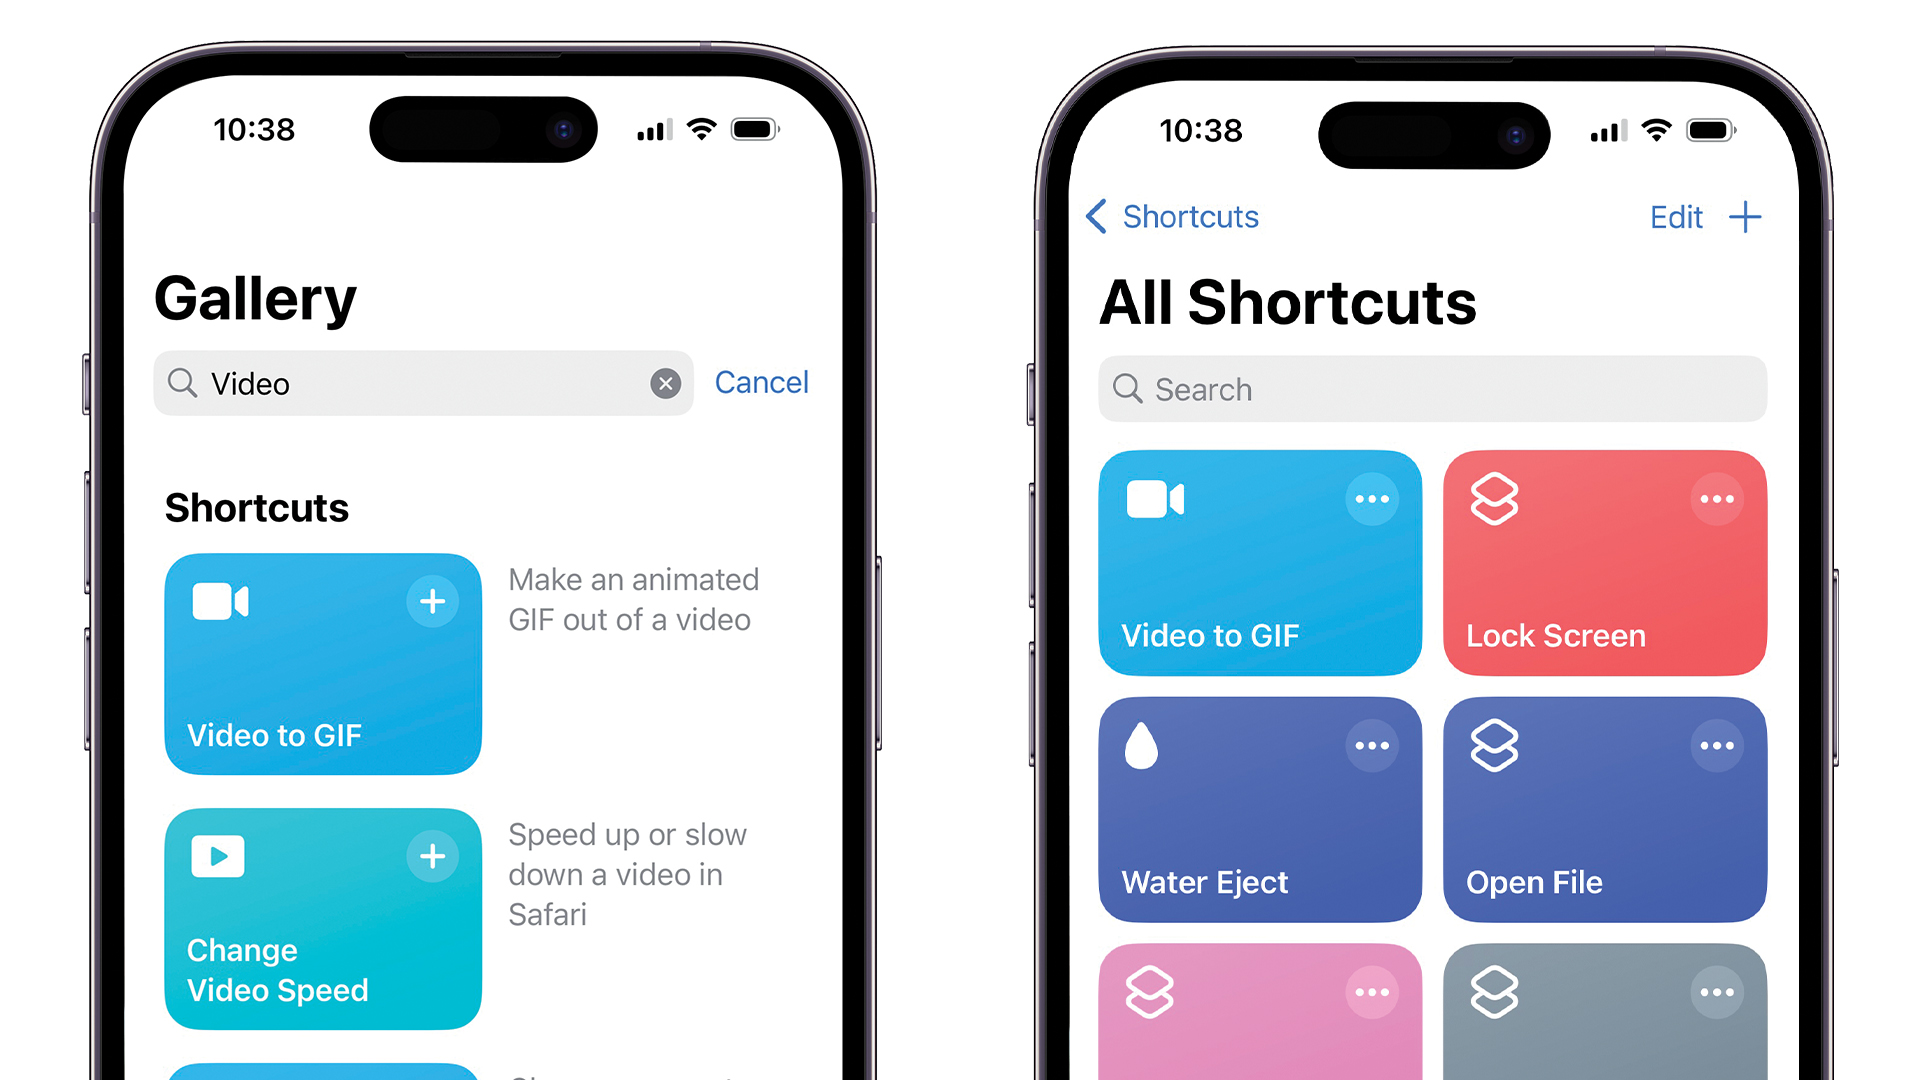 How to Make a GIF From Your iPhone Videos Using Shortcuts